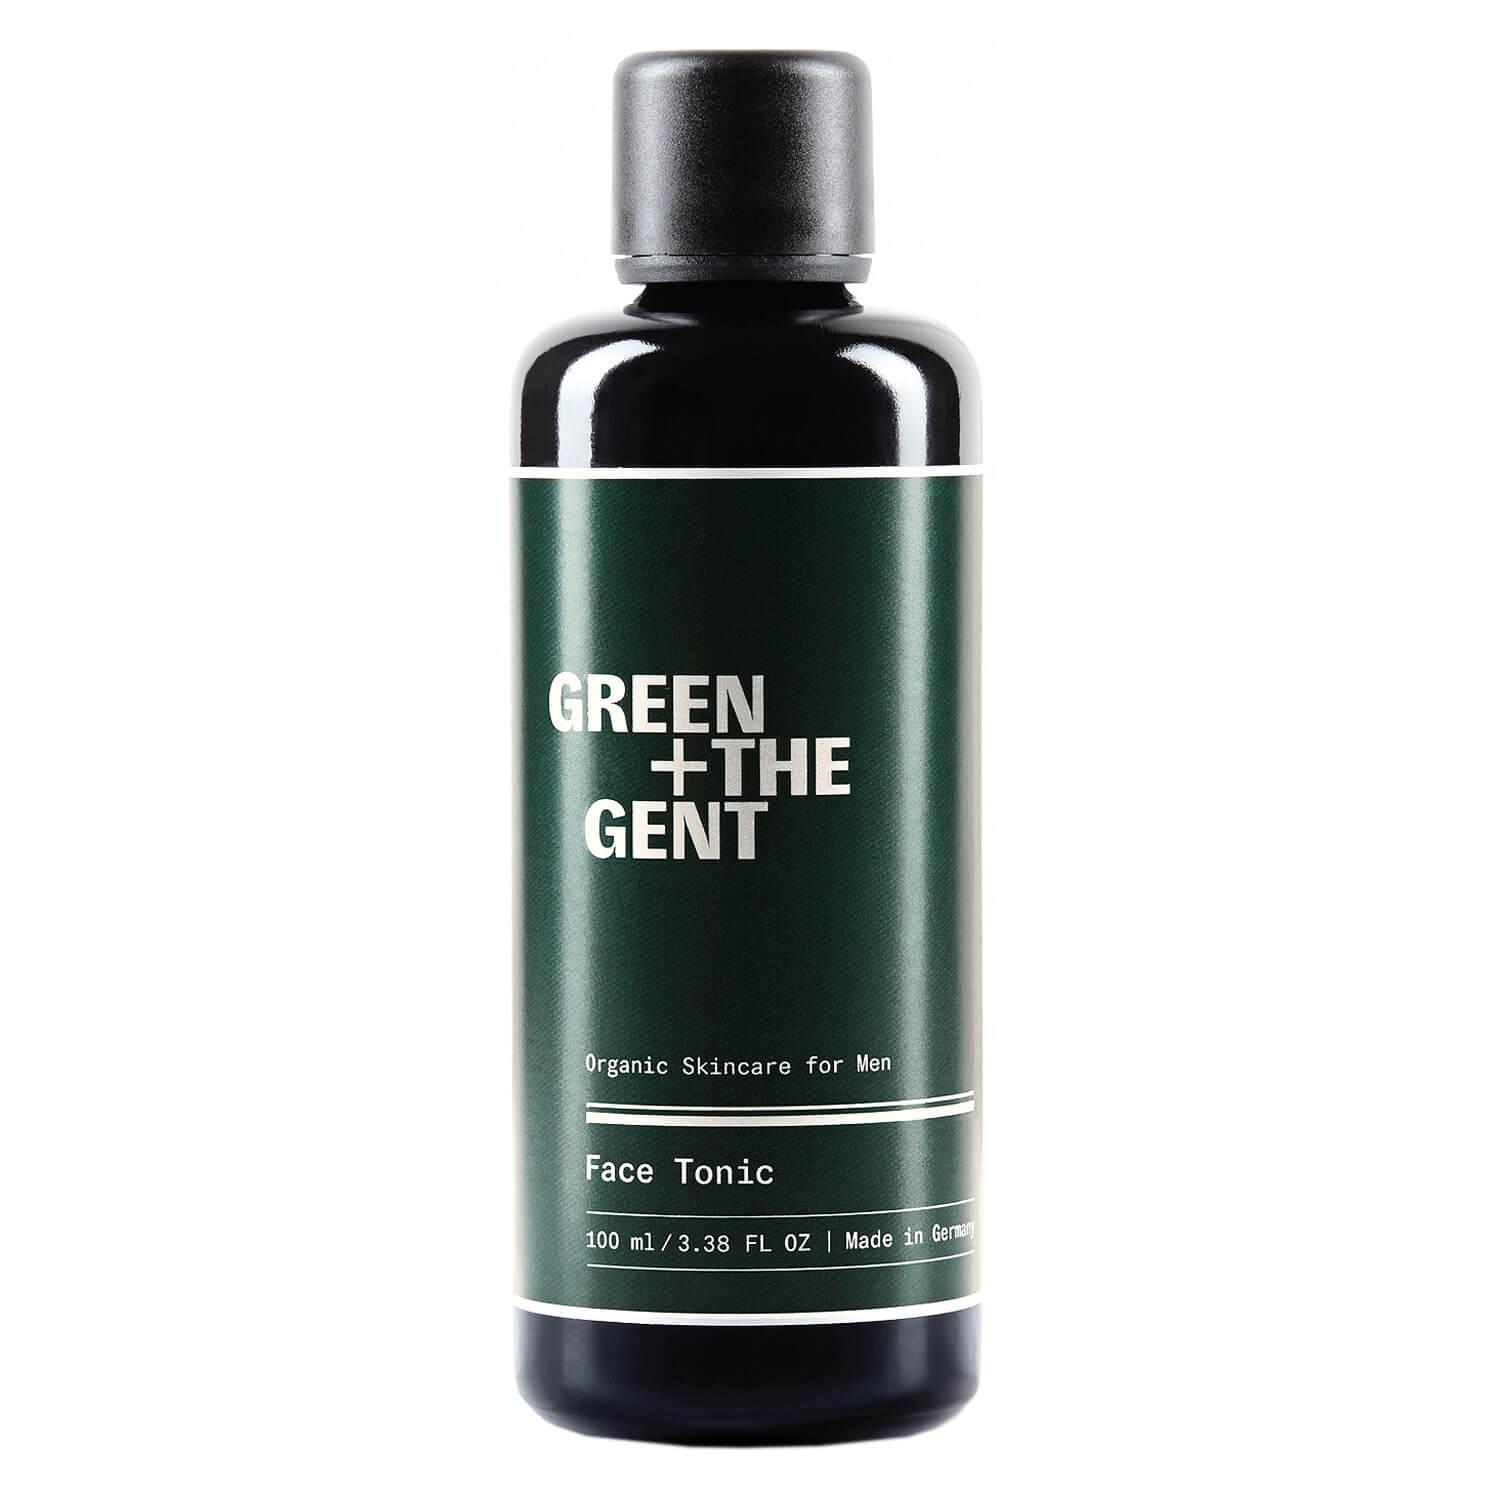 Green + The Gent - Face Tonic